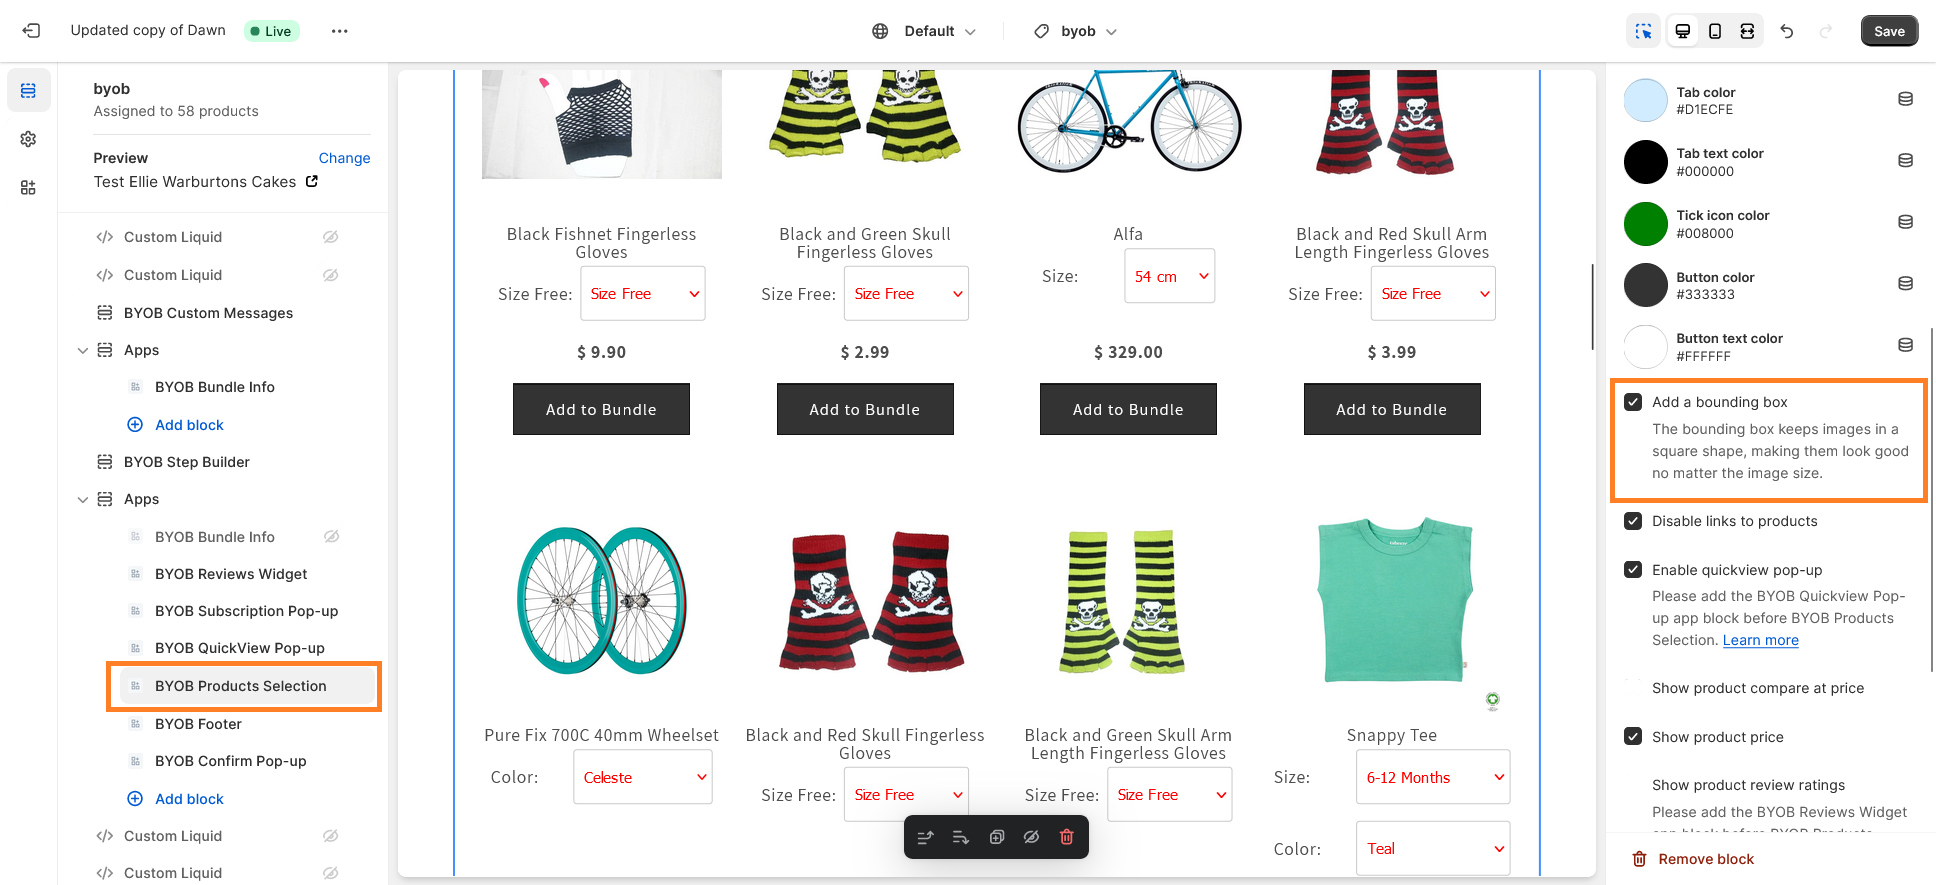 Add a bounding box to tidy up your product images